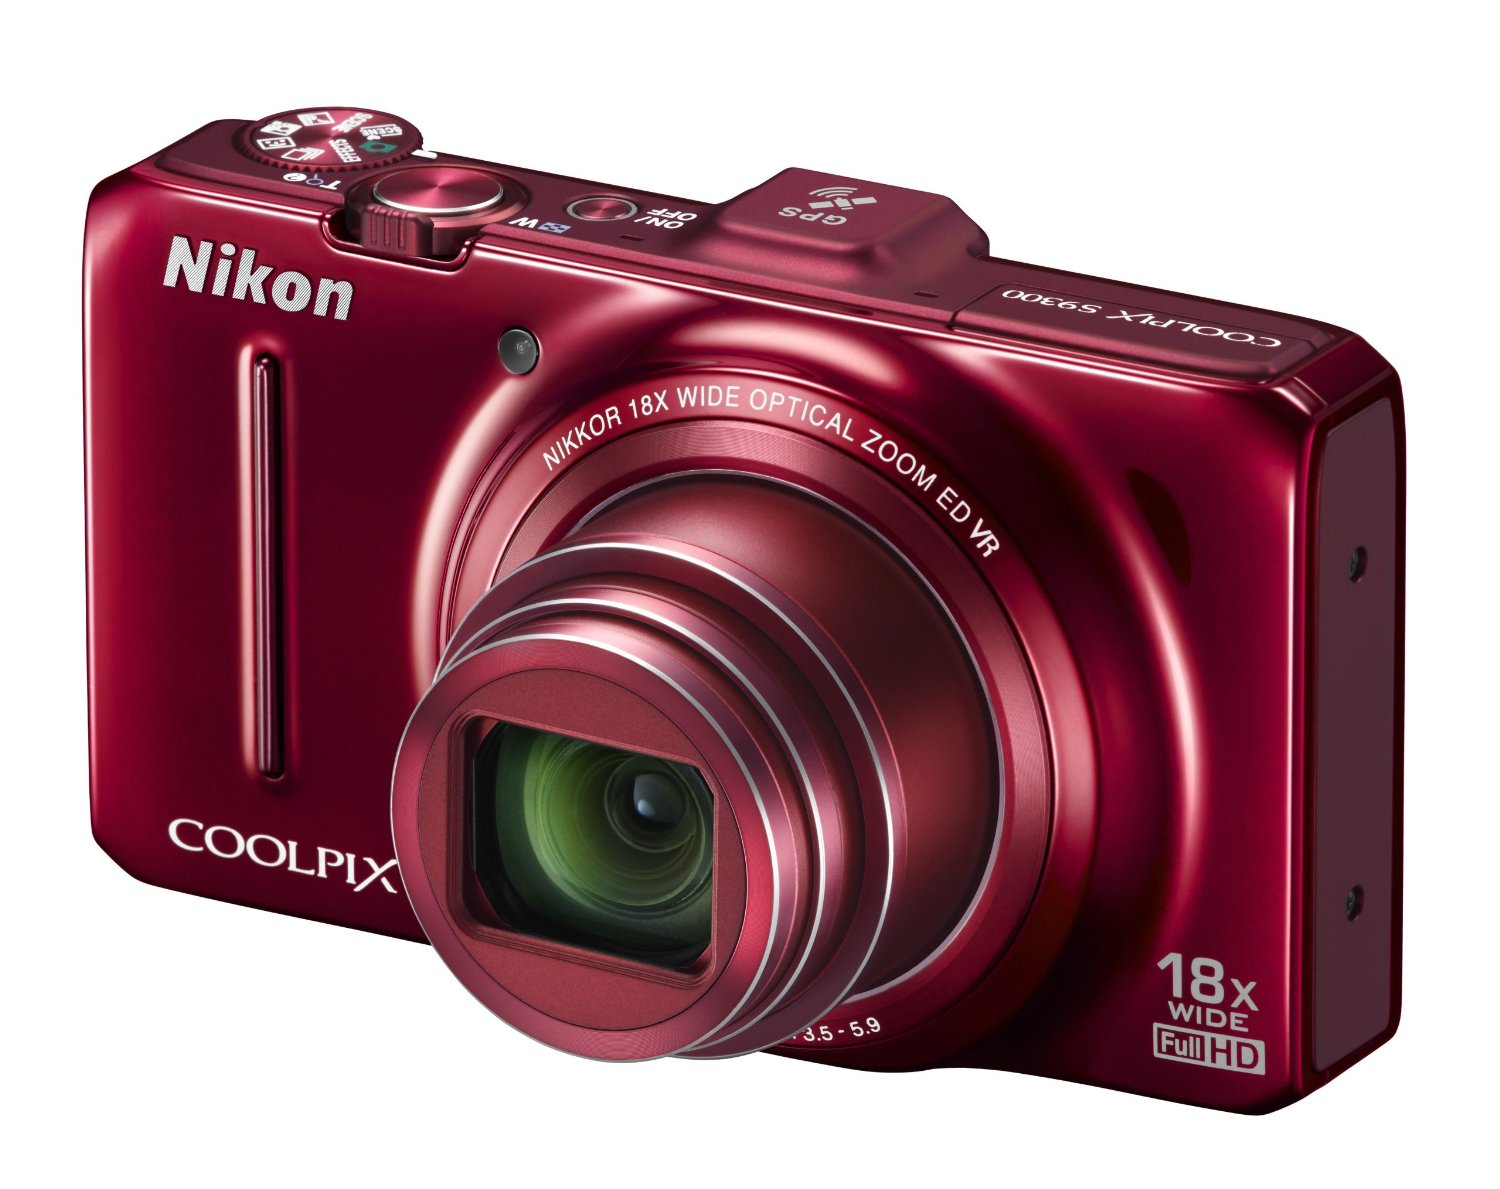 Nikon COOLPIX S9300 16 MP CMOS Digital Camera with 18x Zoom NIKKOR ED Glass Lens and Full HD 1080p Video (Red) $182.95